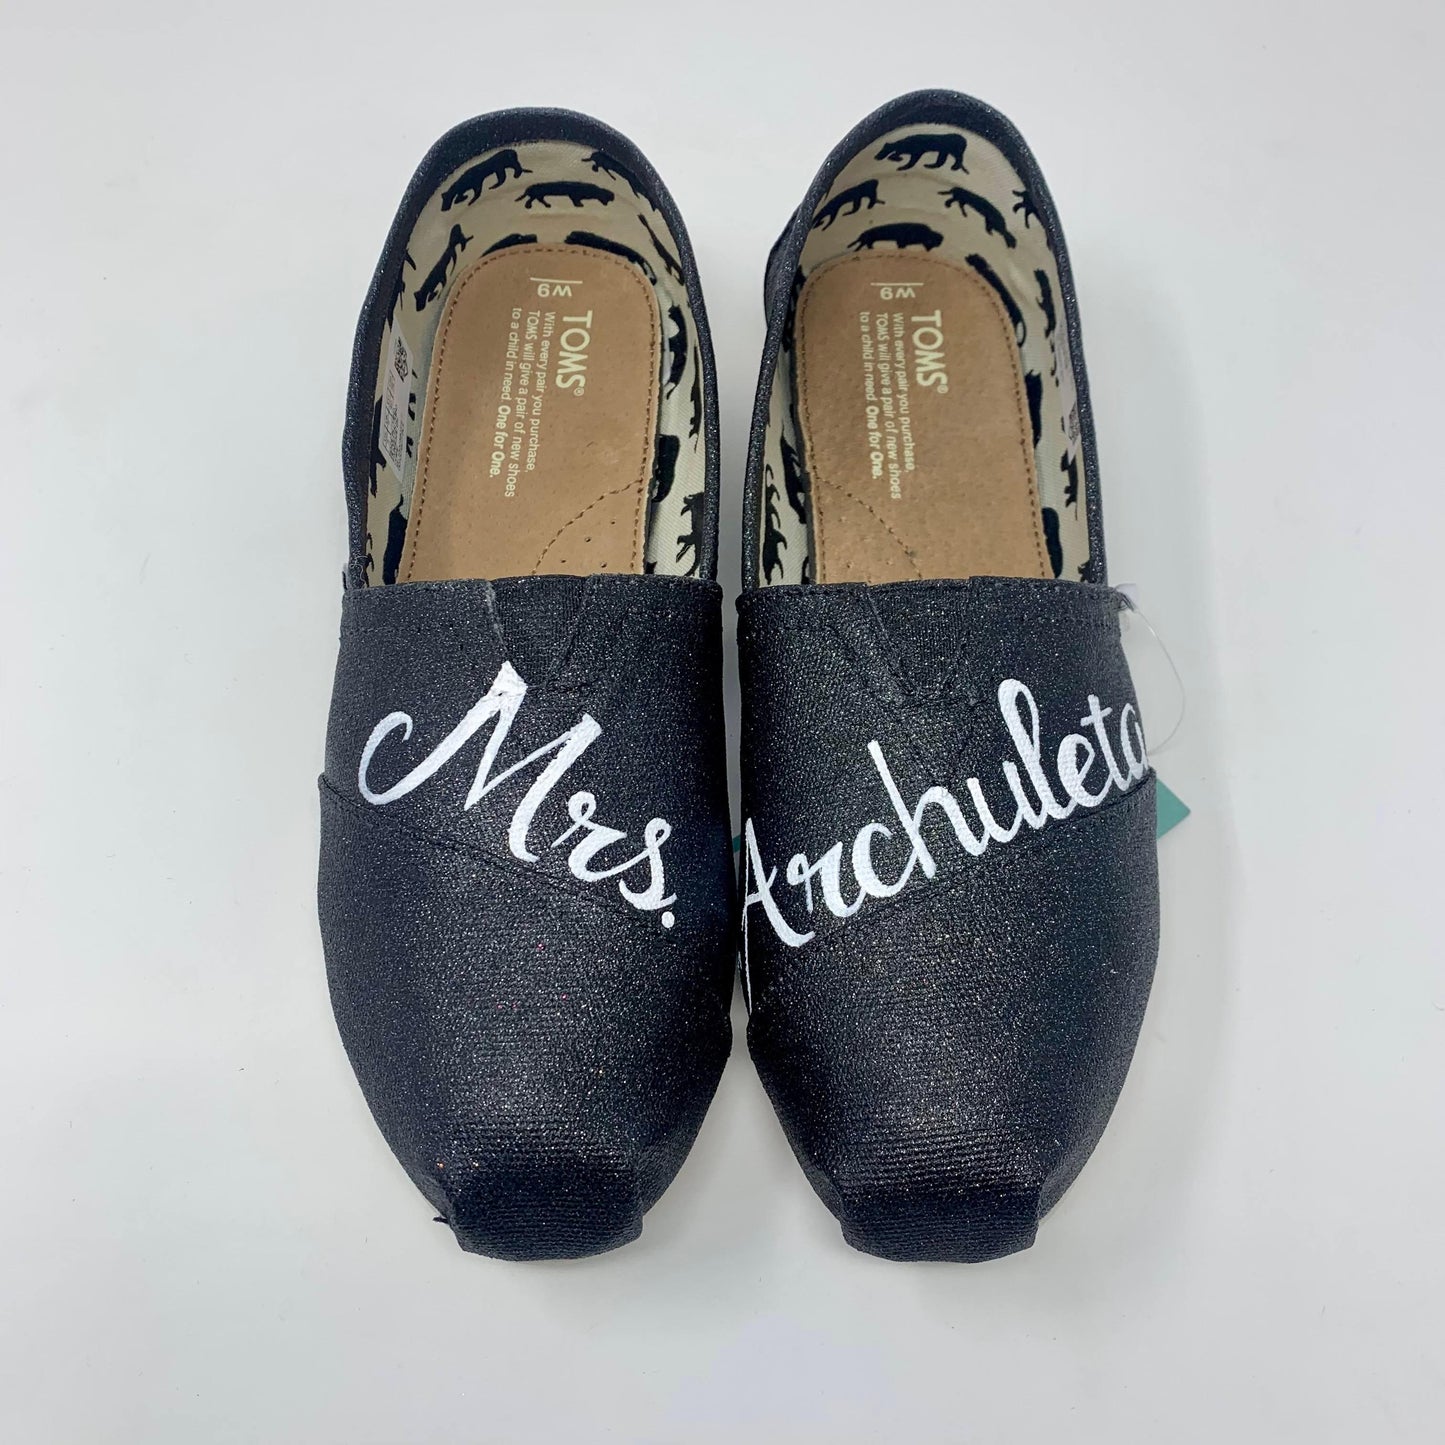 Black Glitter Slip On TOMS shoes with Mrs. painted on front for a bride. white background